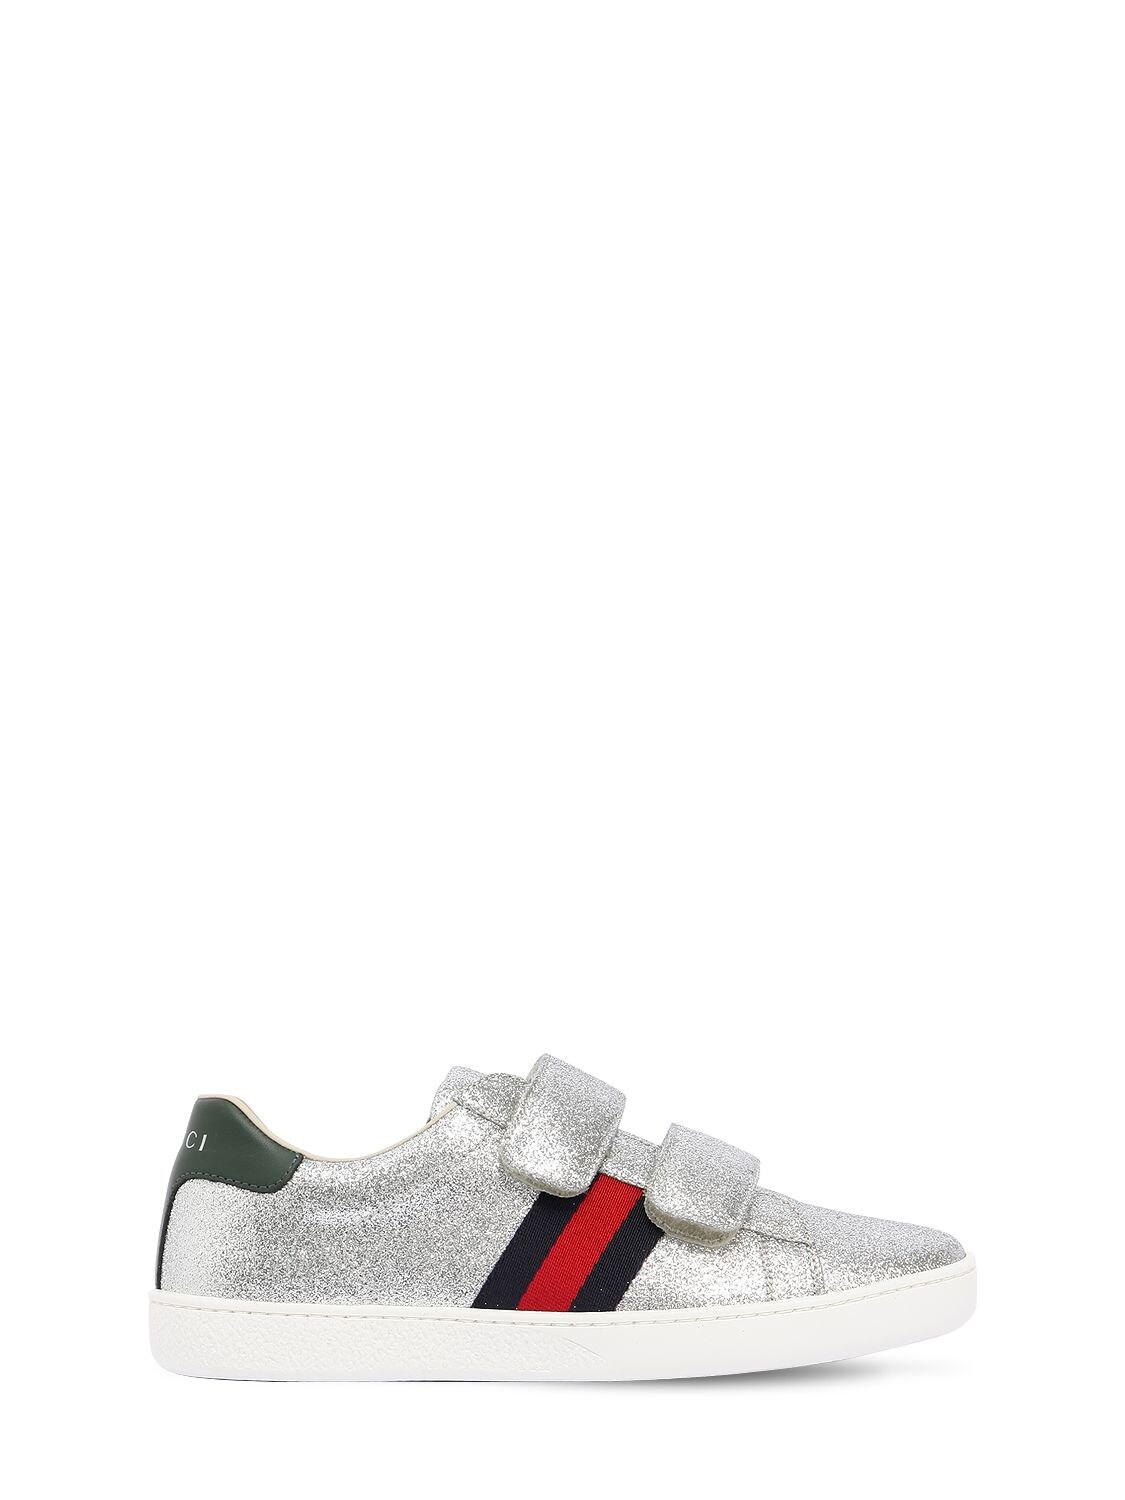 GUCCI GLITTERED LEATHER STRAP SNEAKERS,68IFHB010-ODE4NQ2